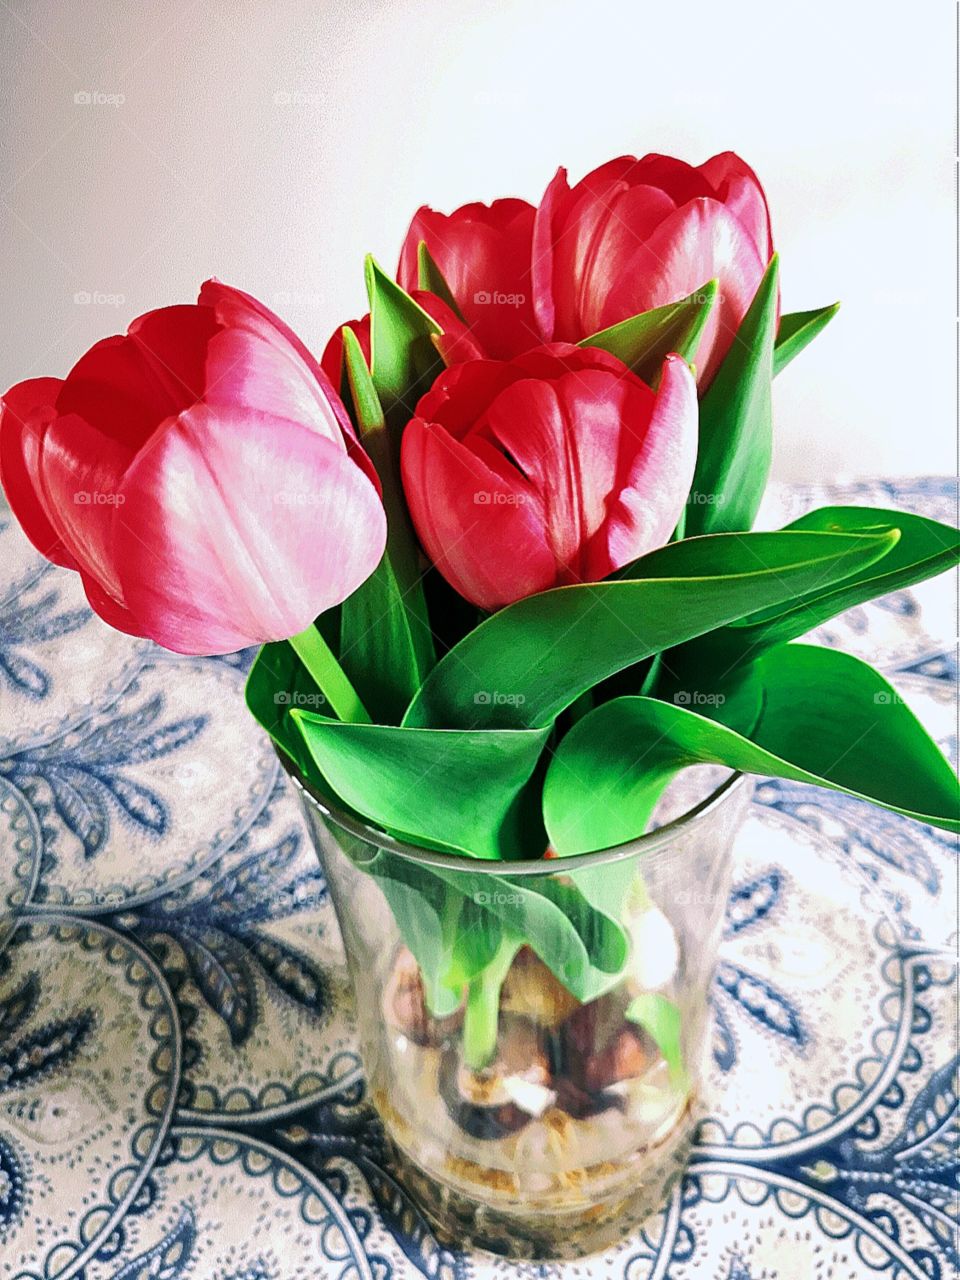 red tulips bulbs in a vase